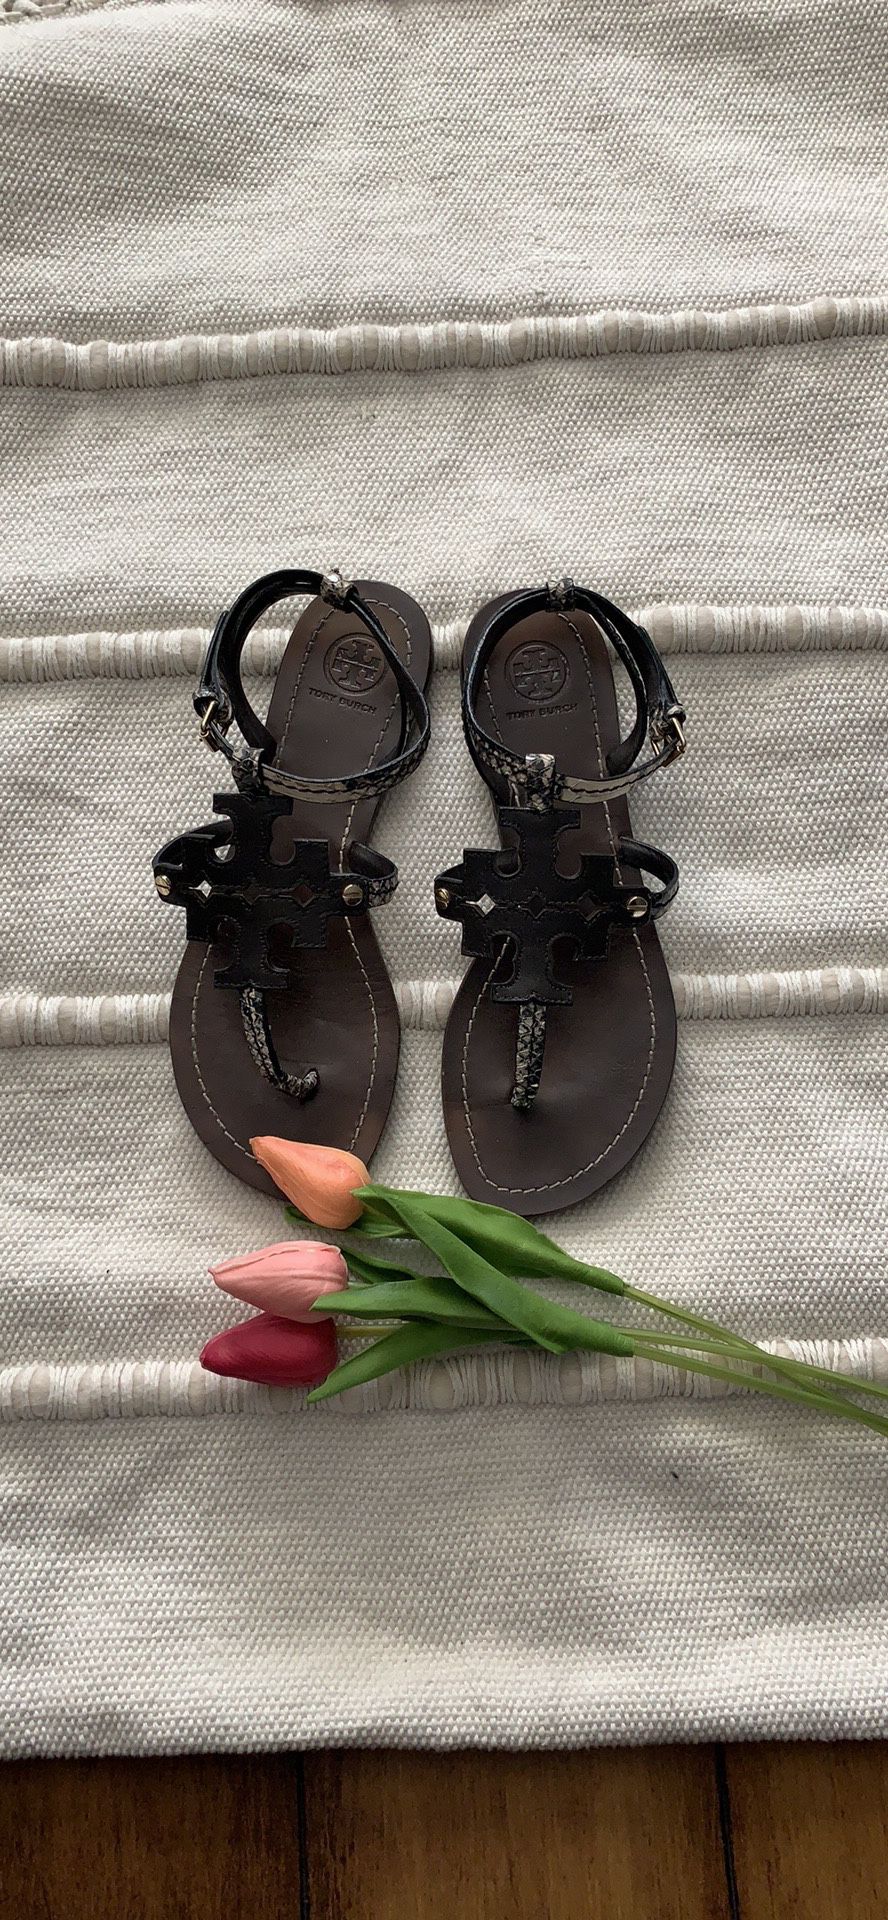 Tory Burch Chandler Sandals for Sale in Victorville, CA - OfferUp